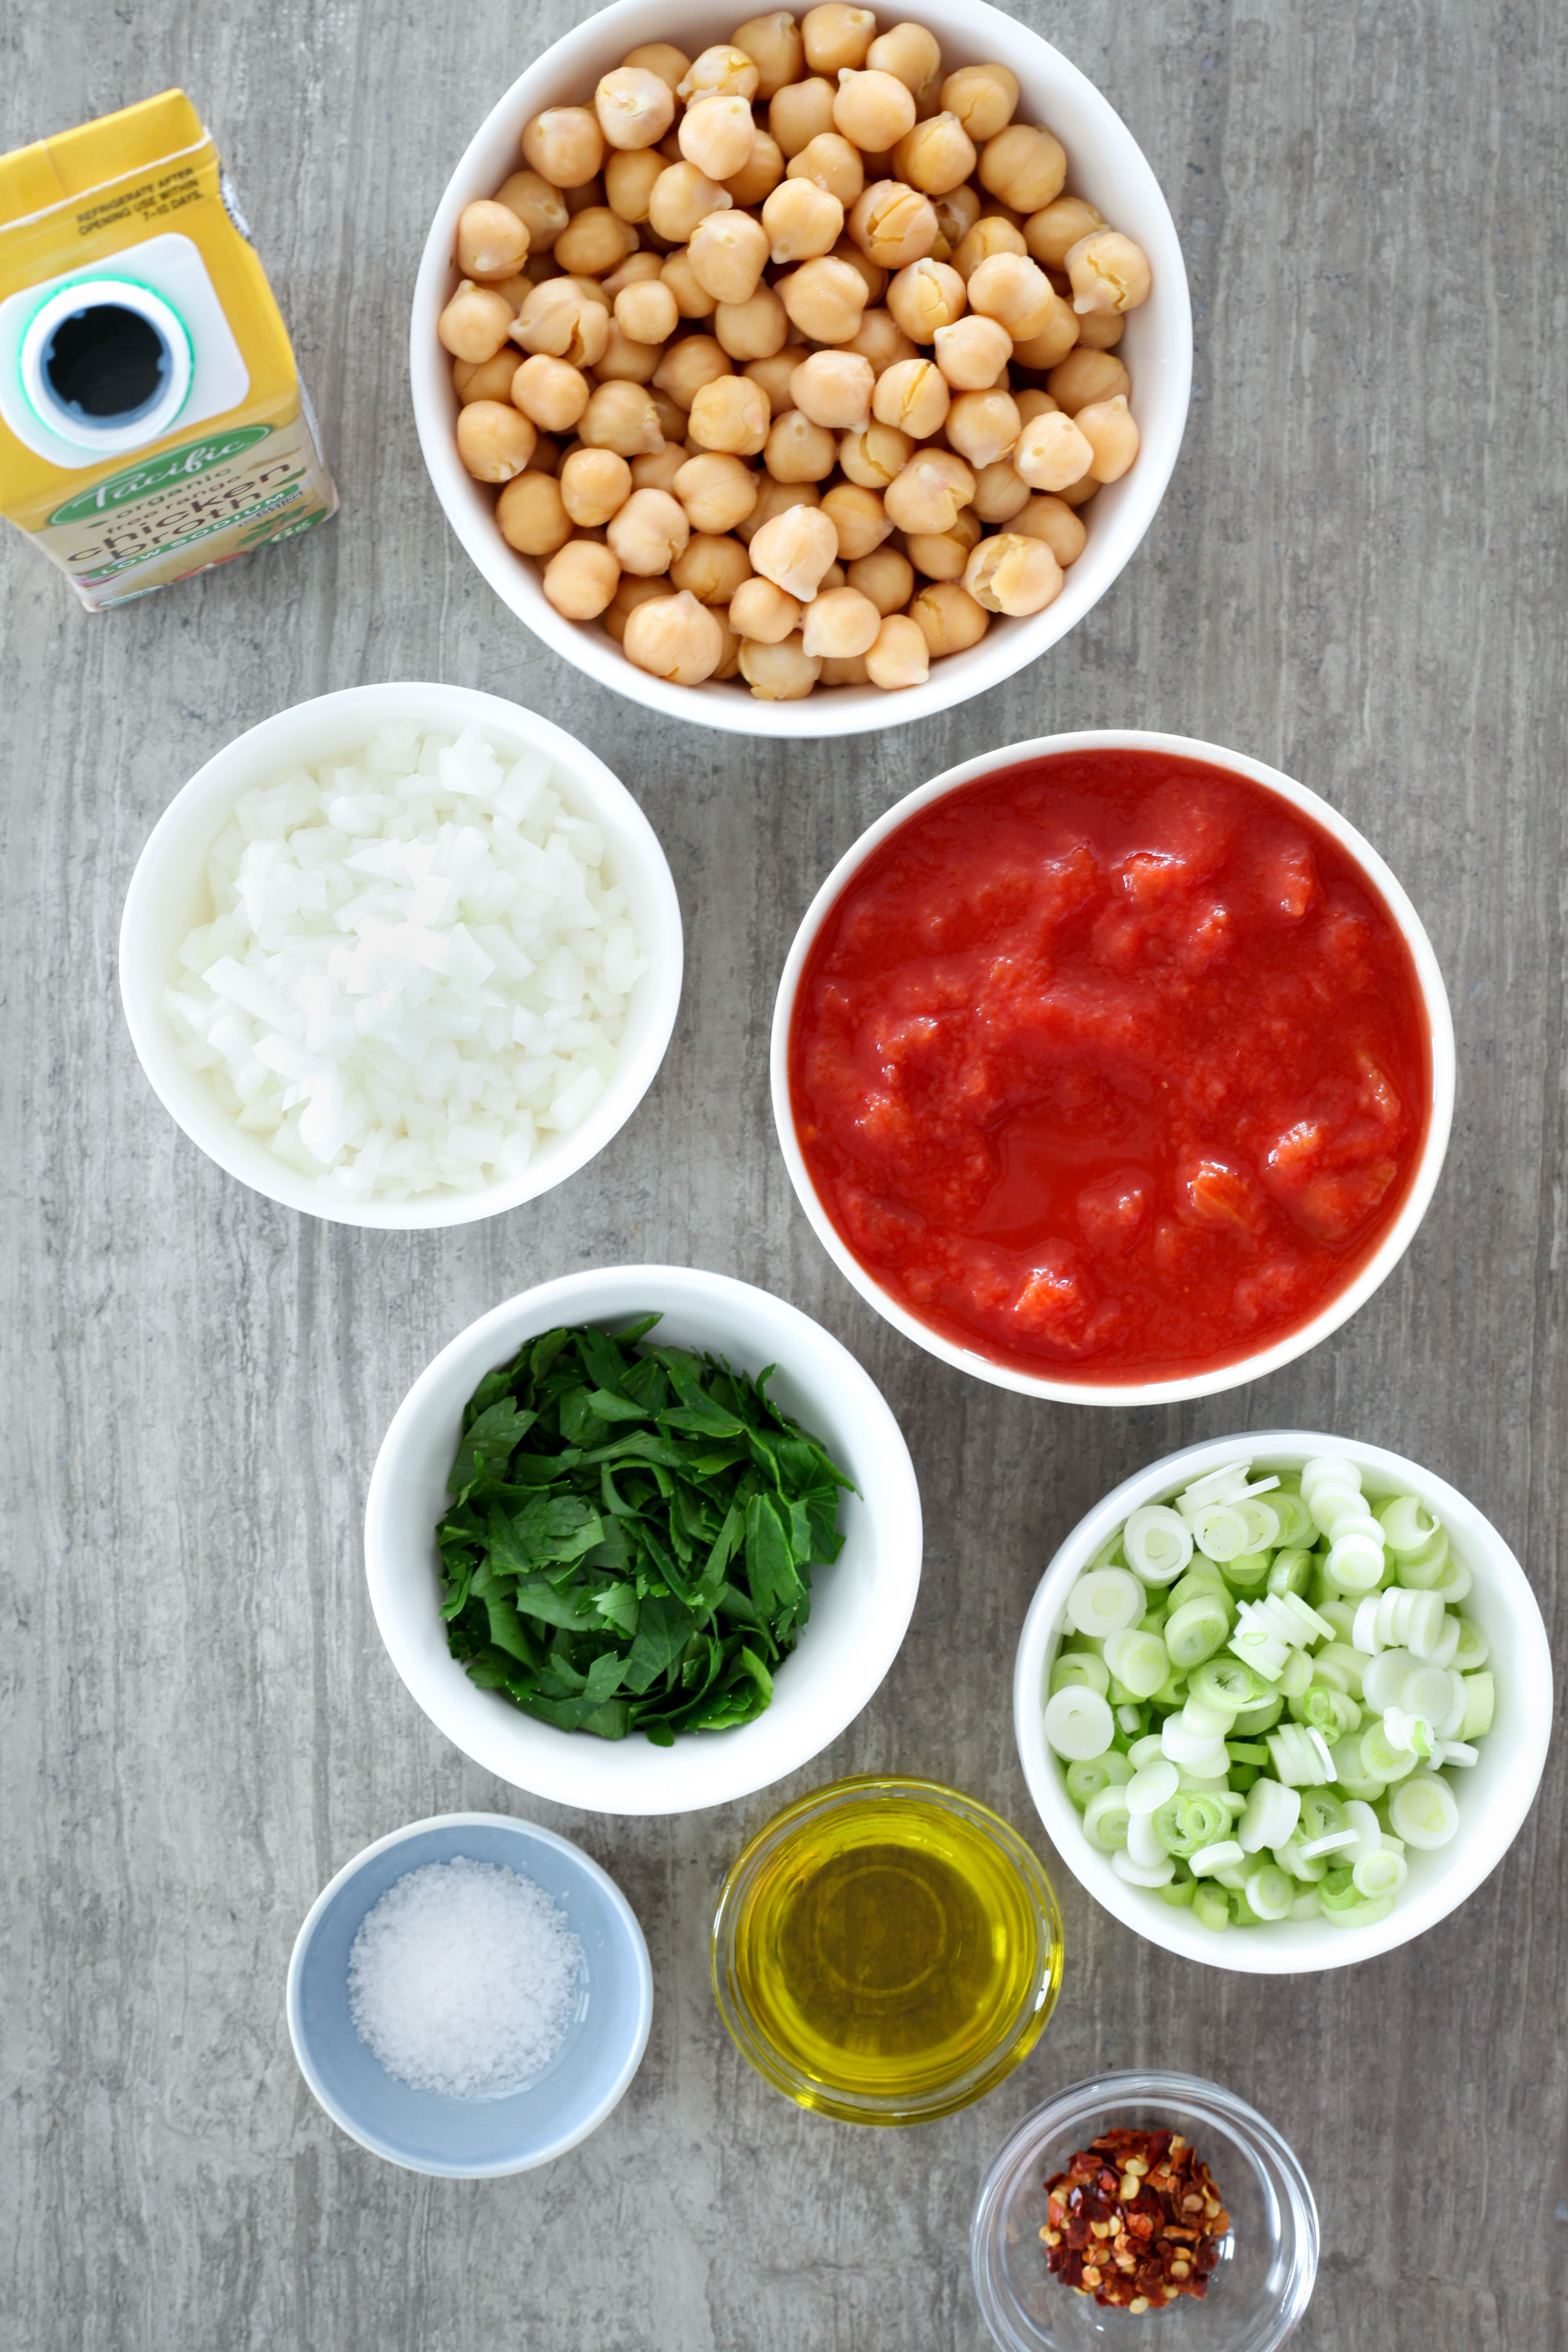 Spicy chickpea tomato ragout ingredients